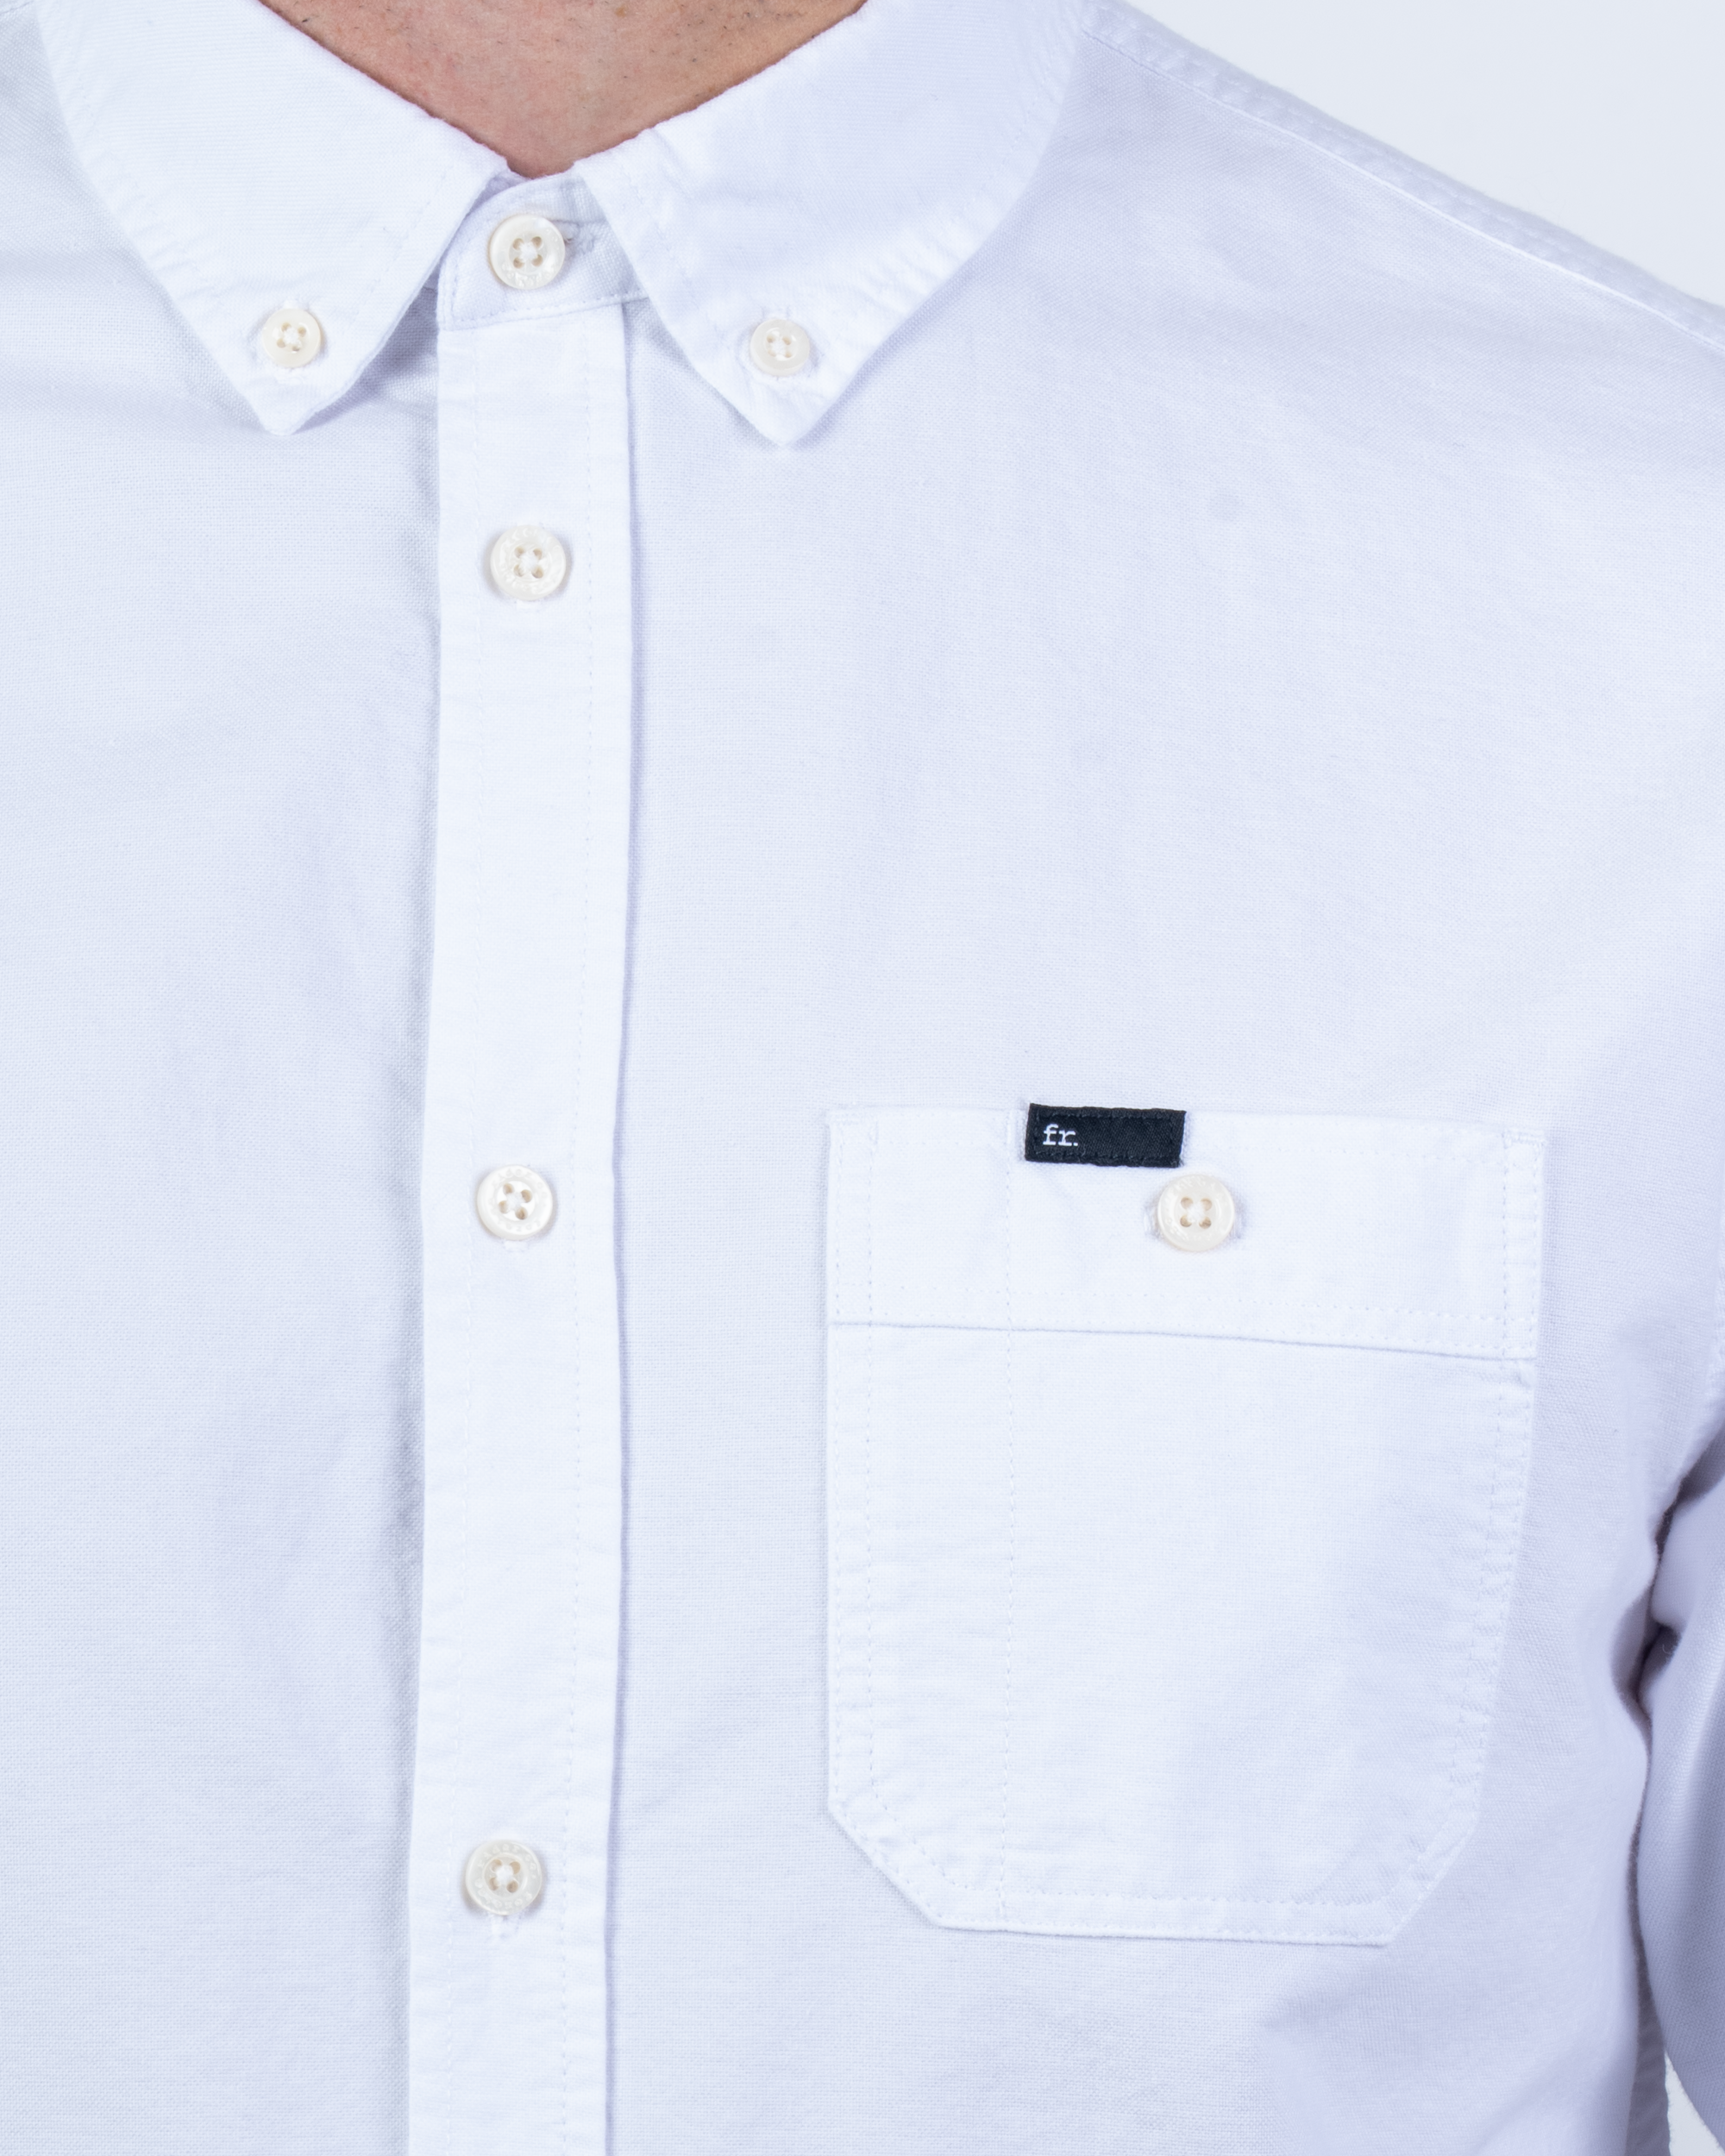 Foreign Rider Co Organic Cotton White Utility Button Down Oxford Button Chest Pocket with FR. Tag